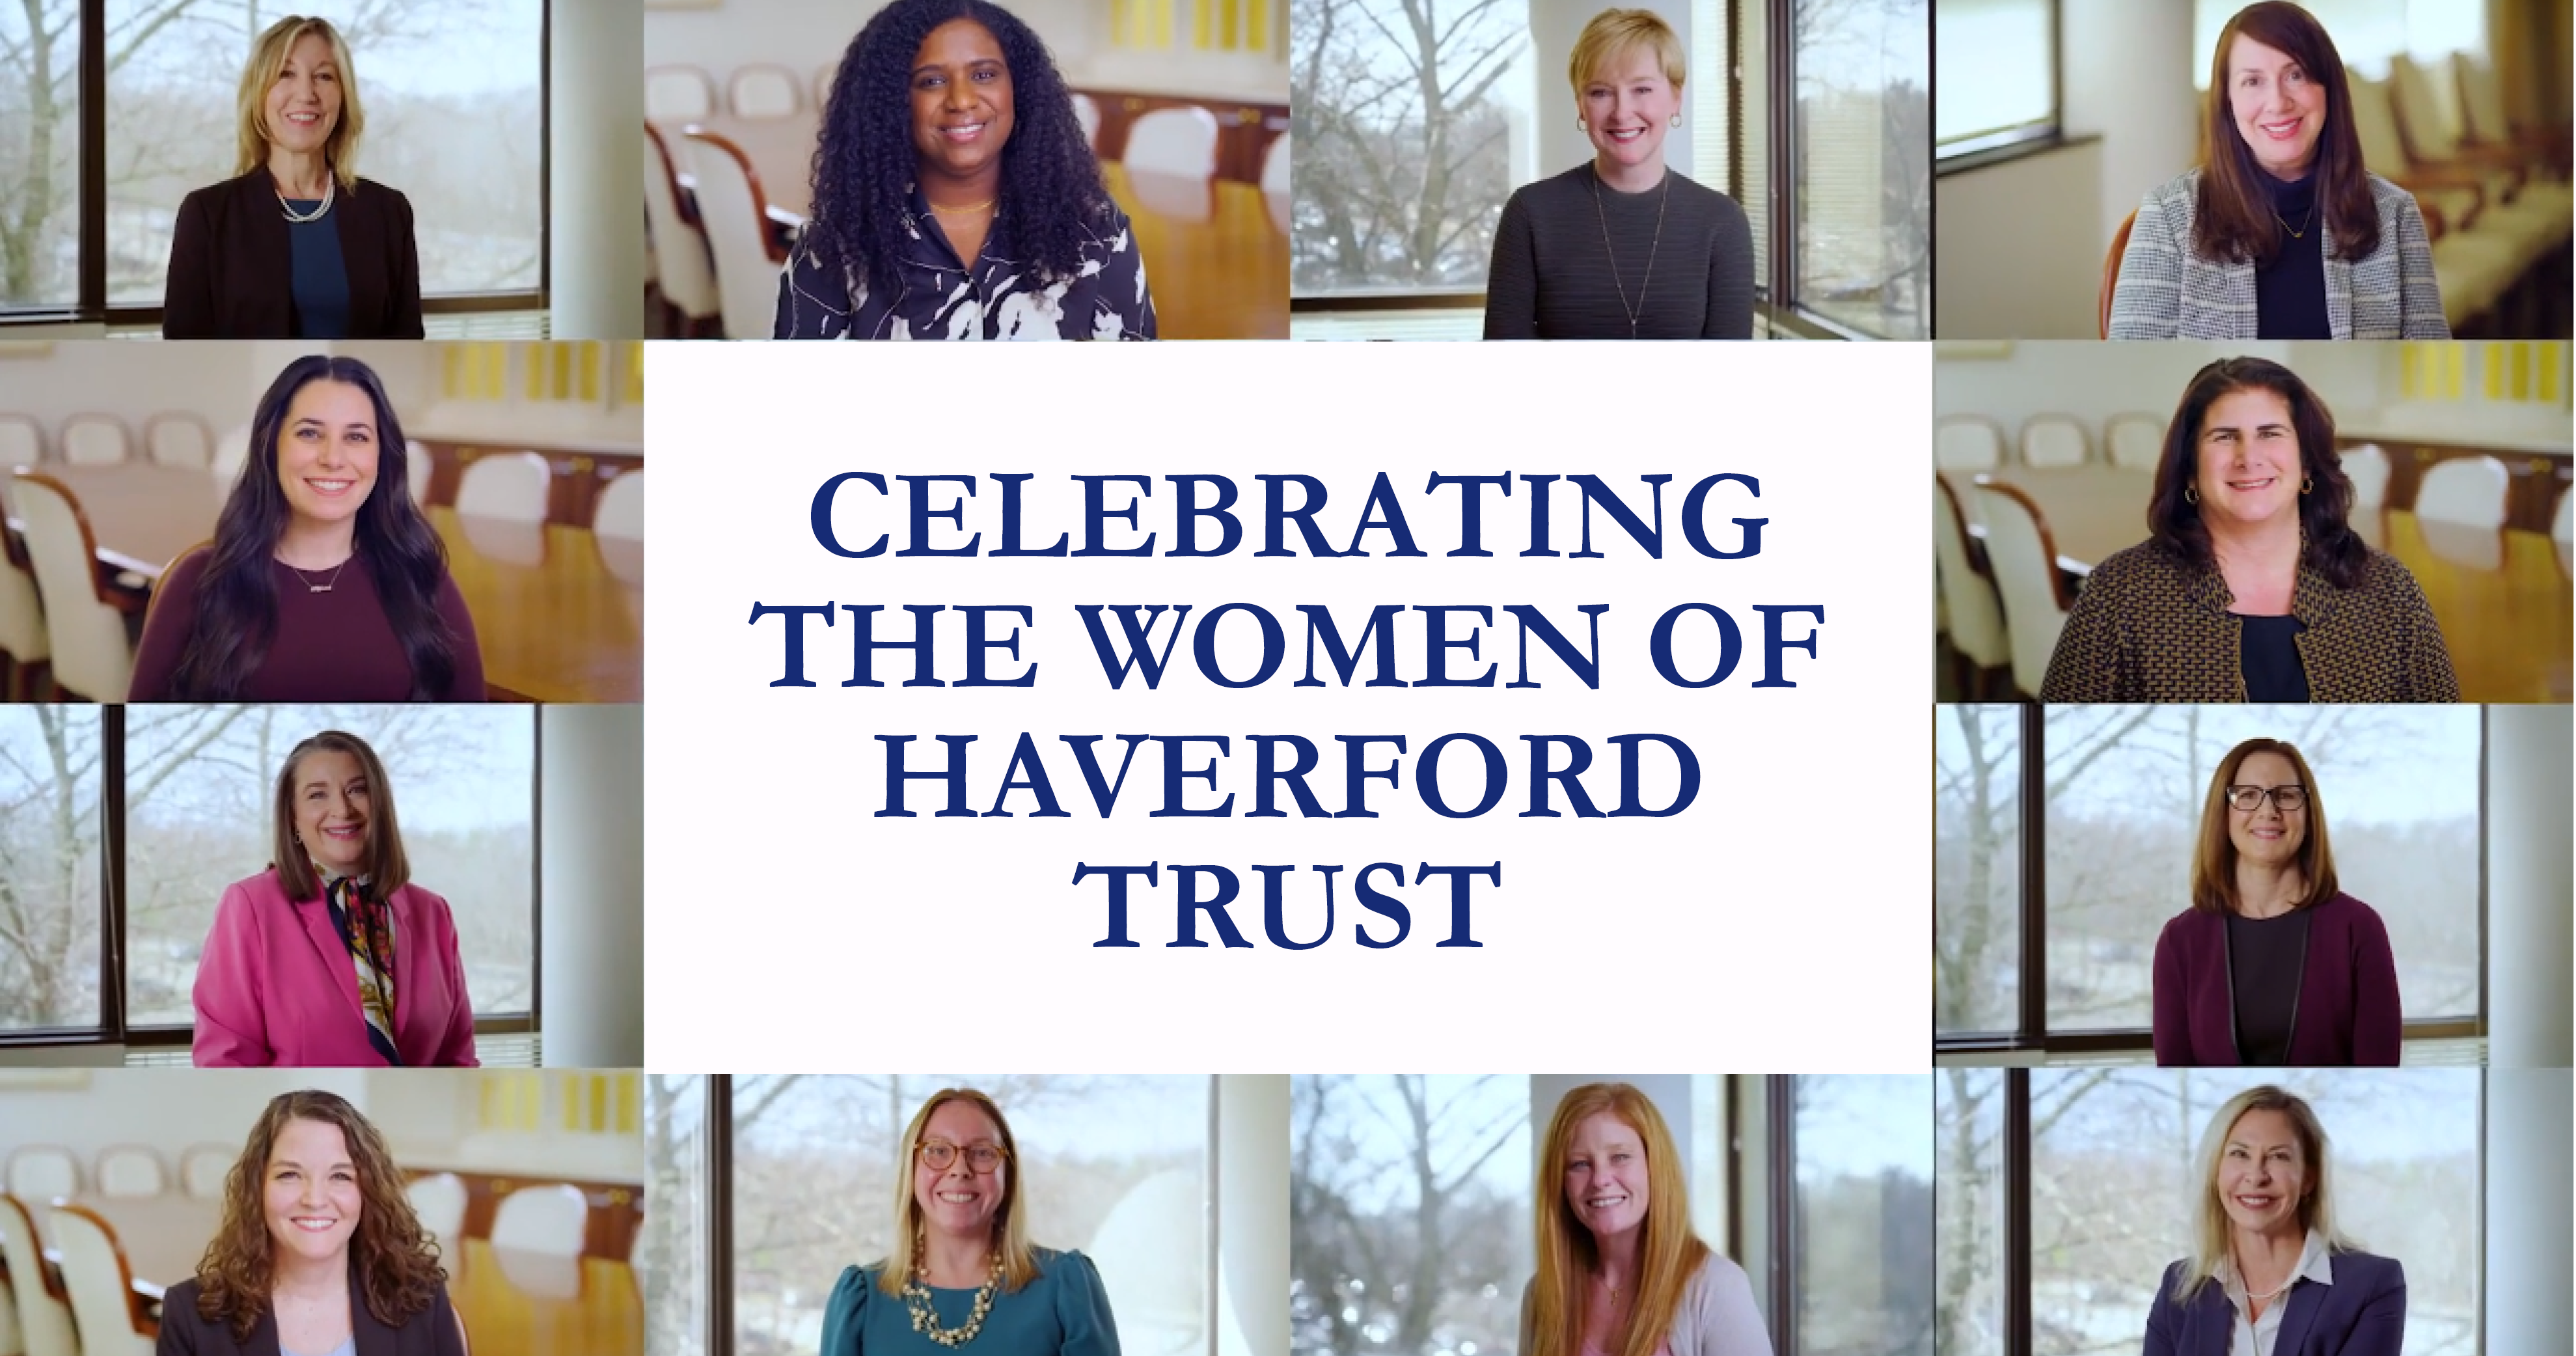 A featured image captured 12 women, all smiling and dressed in professional attire. In the middle of the image, the text reads, "Celebrating The Women of Haverford Trust".